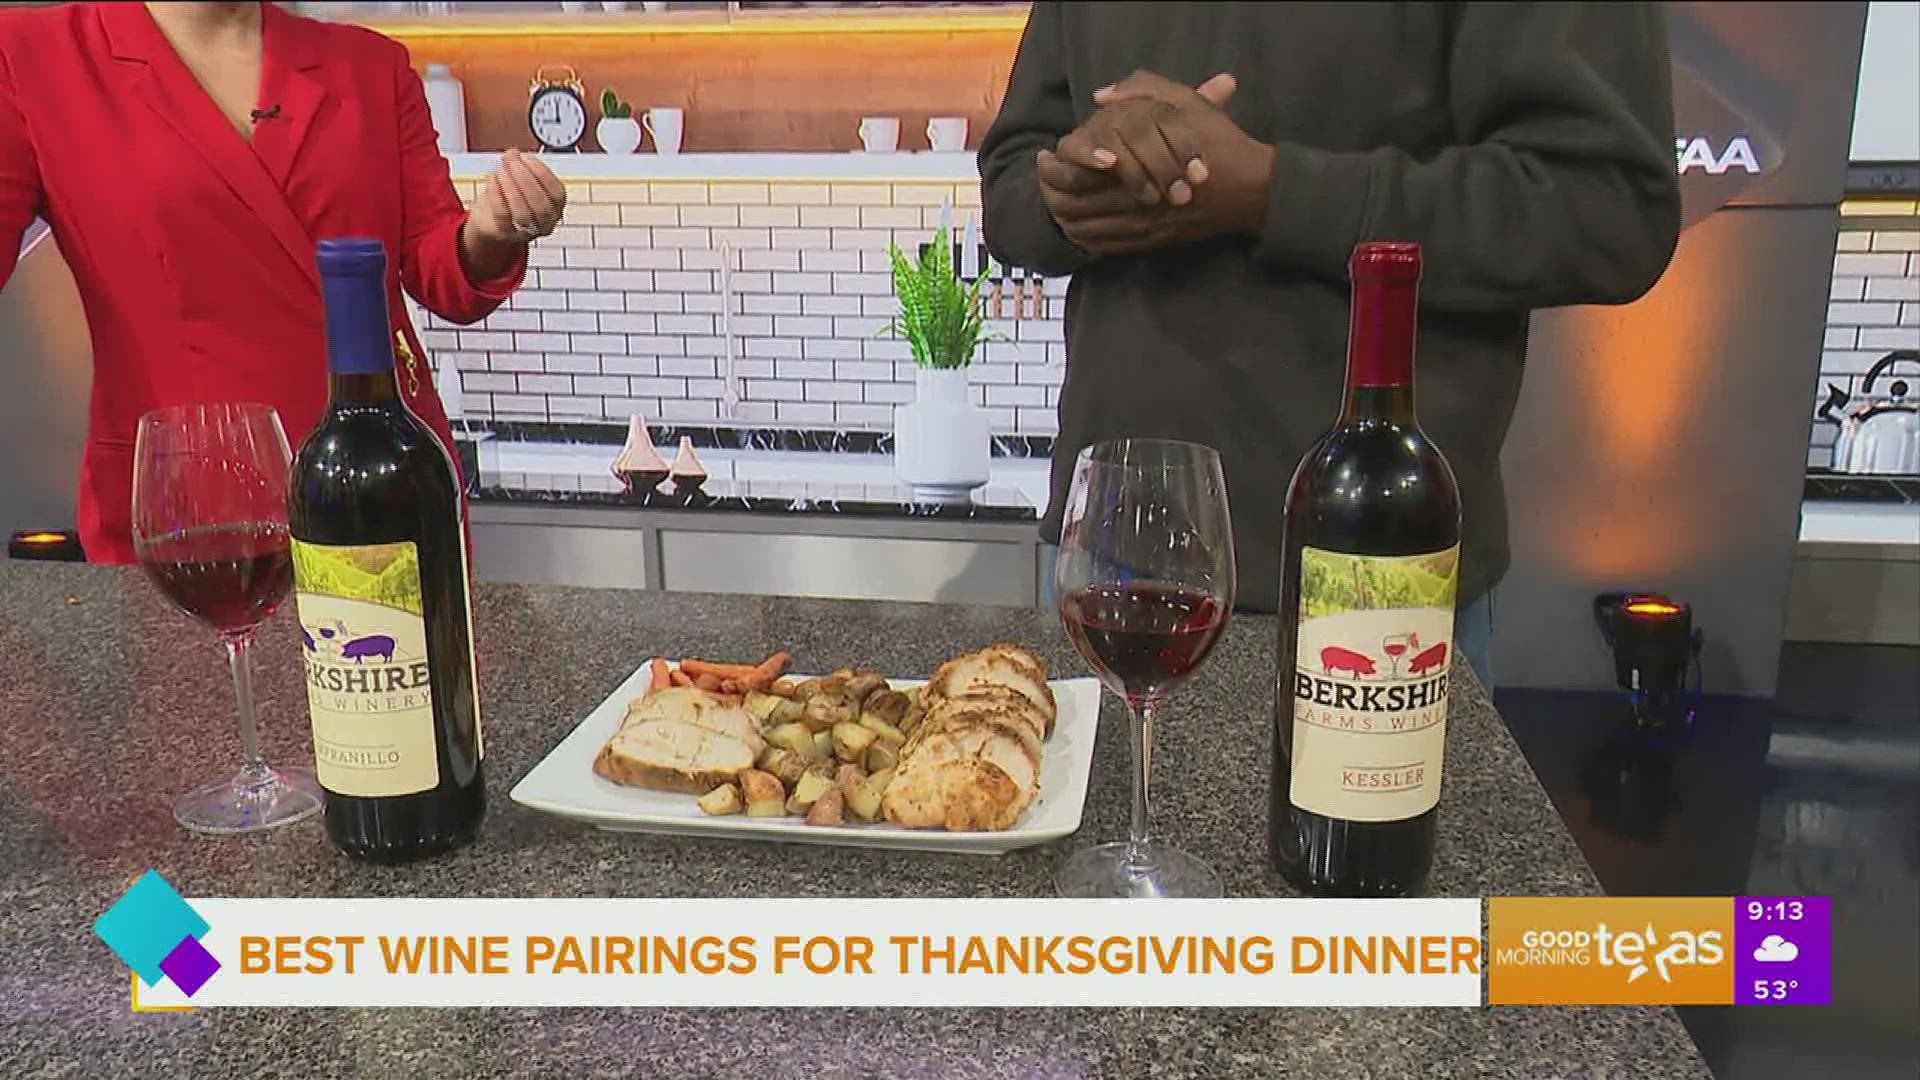 We do a taste test with the Berkshire Farms Winery and show the best wine pairings for your holiday dinner.